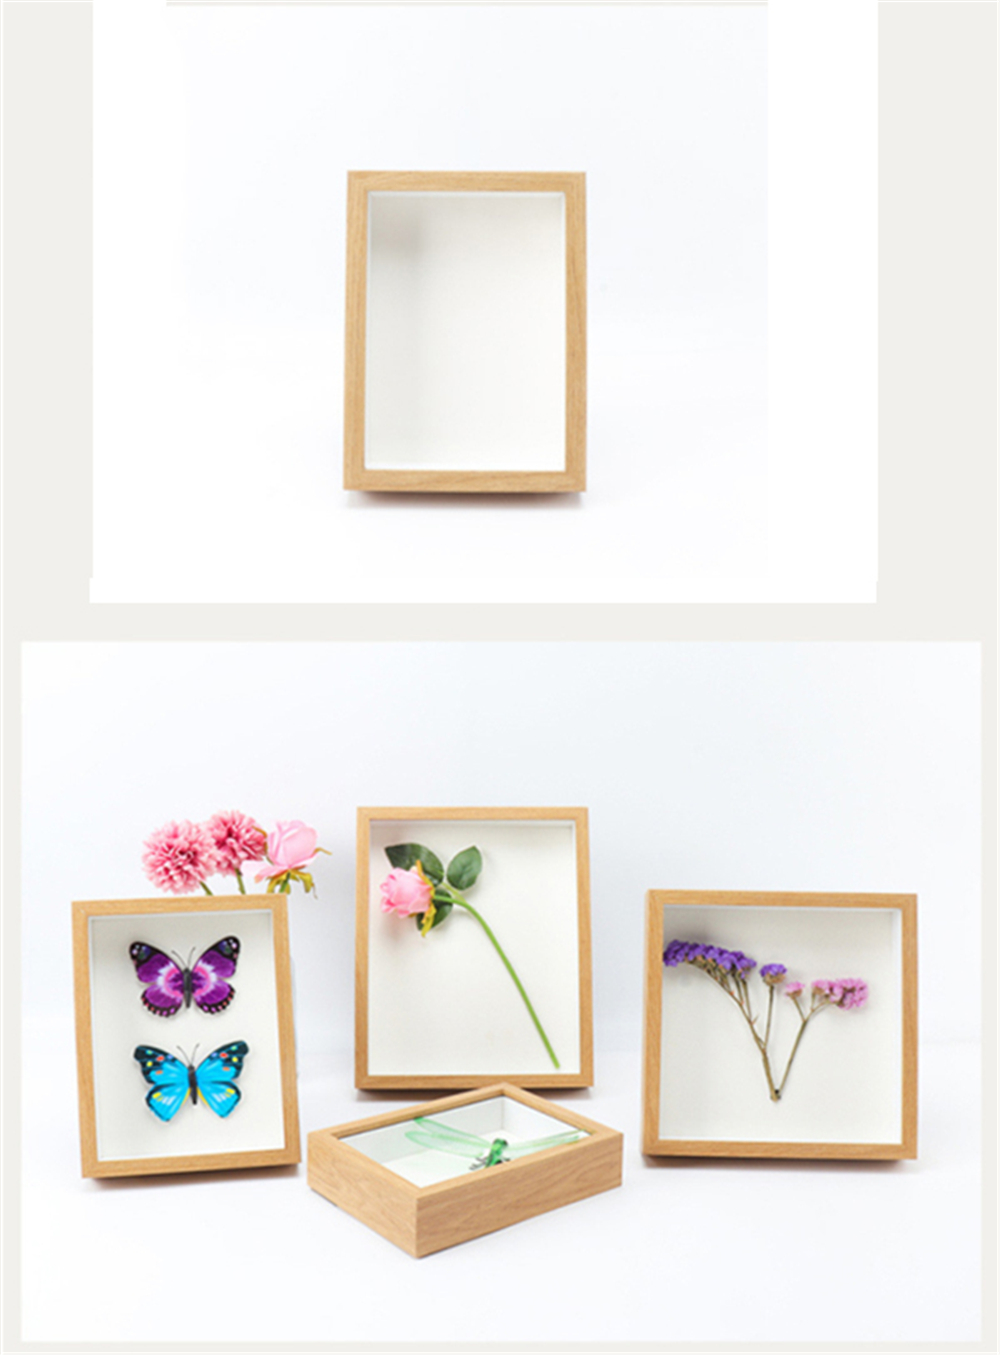 A46810-inch-3D-Hollow-Photo-Frame-Wood-Butterfly-Dragonfly-Dry-Flower-Frame-Home-Office-Desktop-Orna-1795357-11